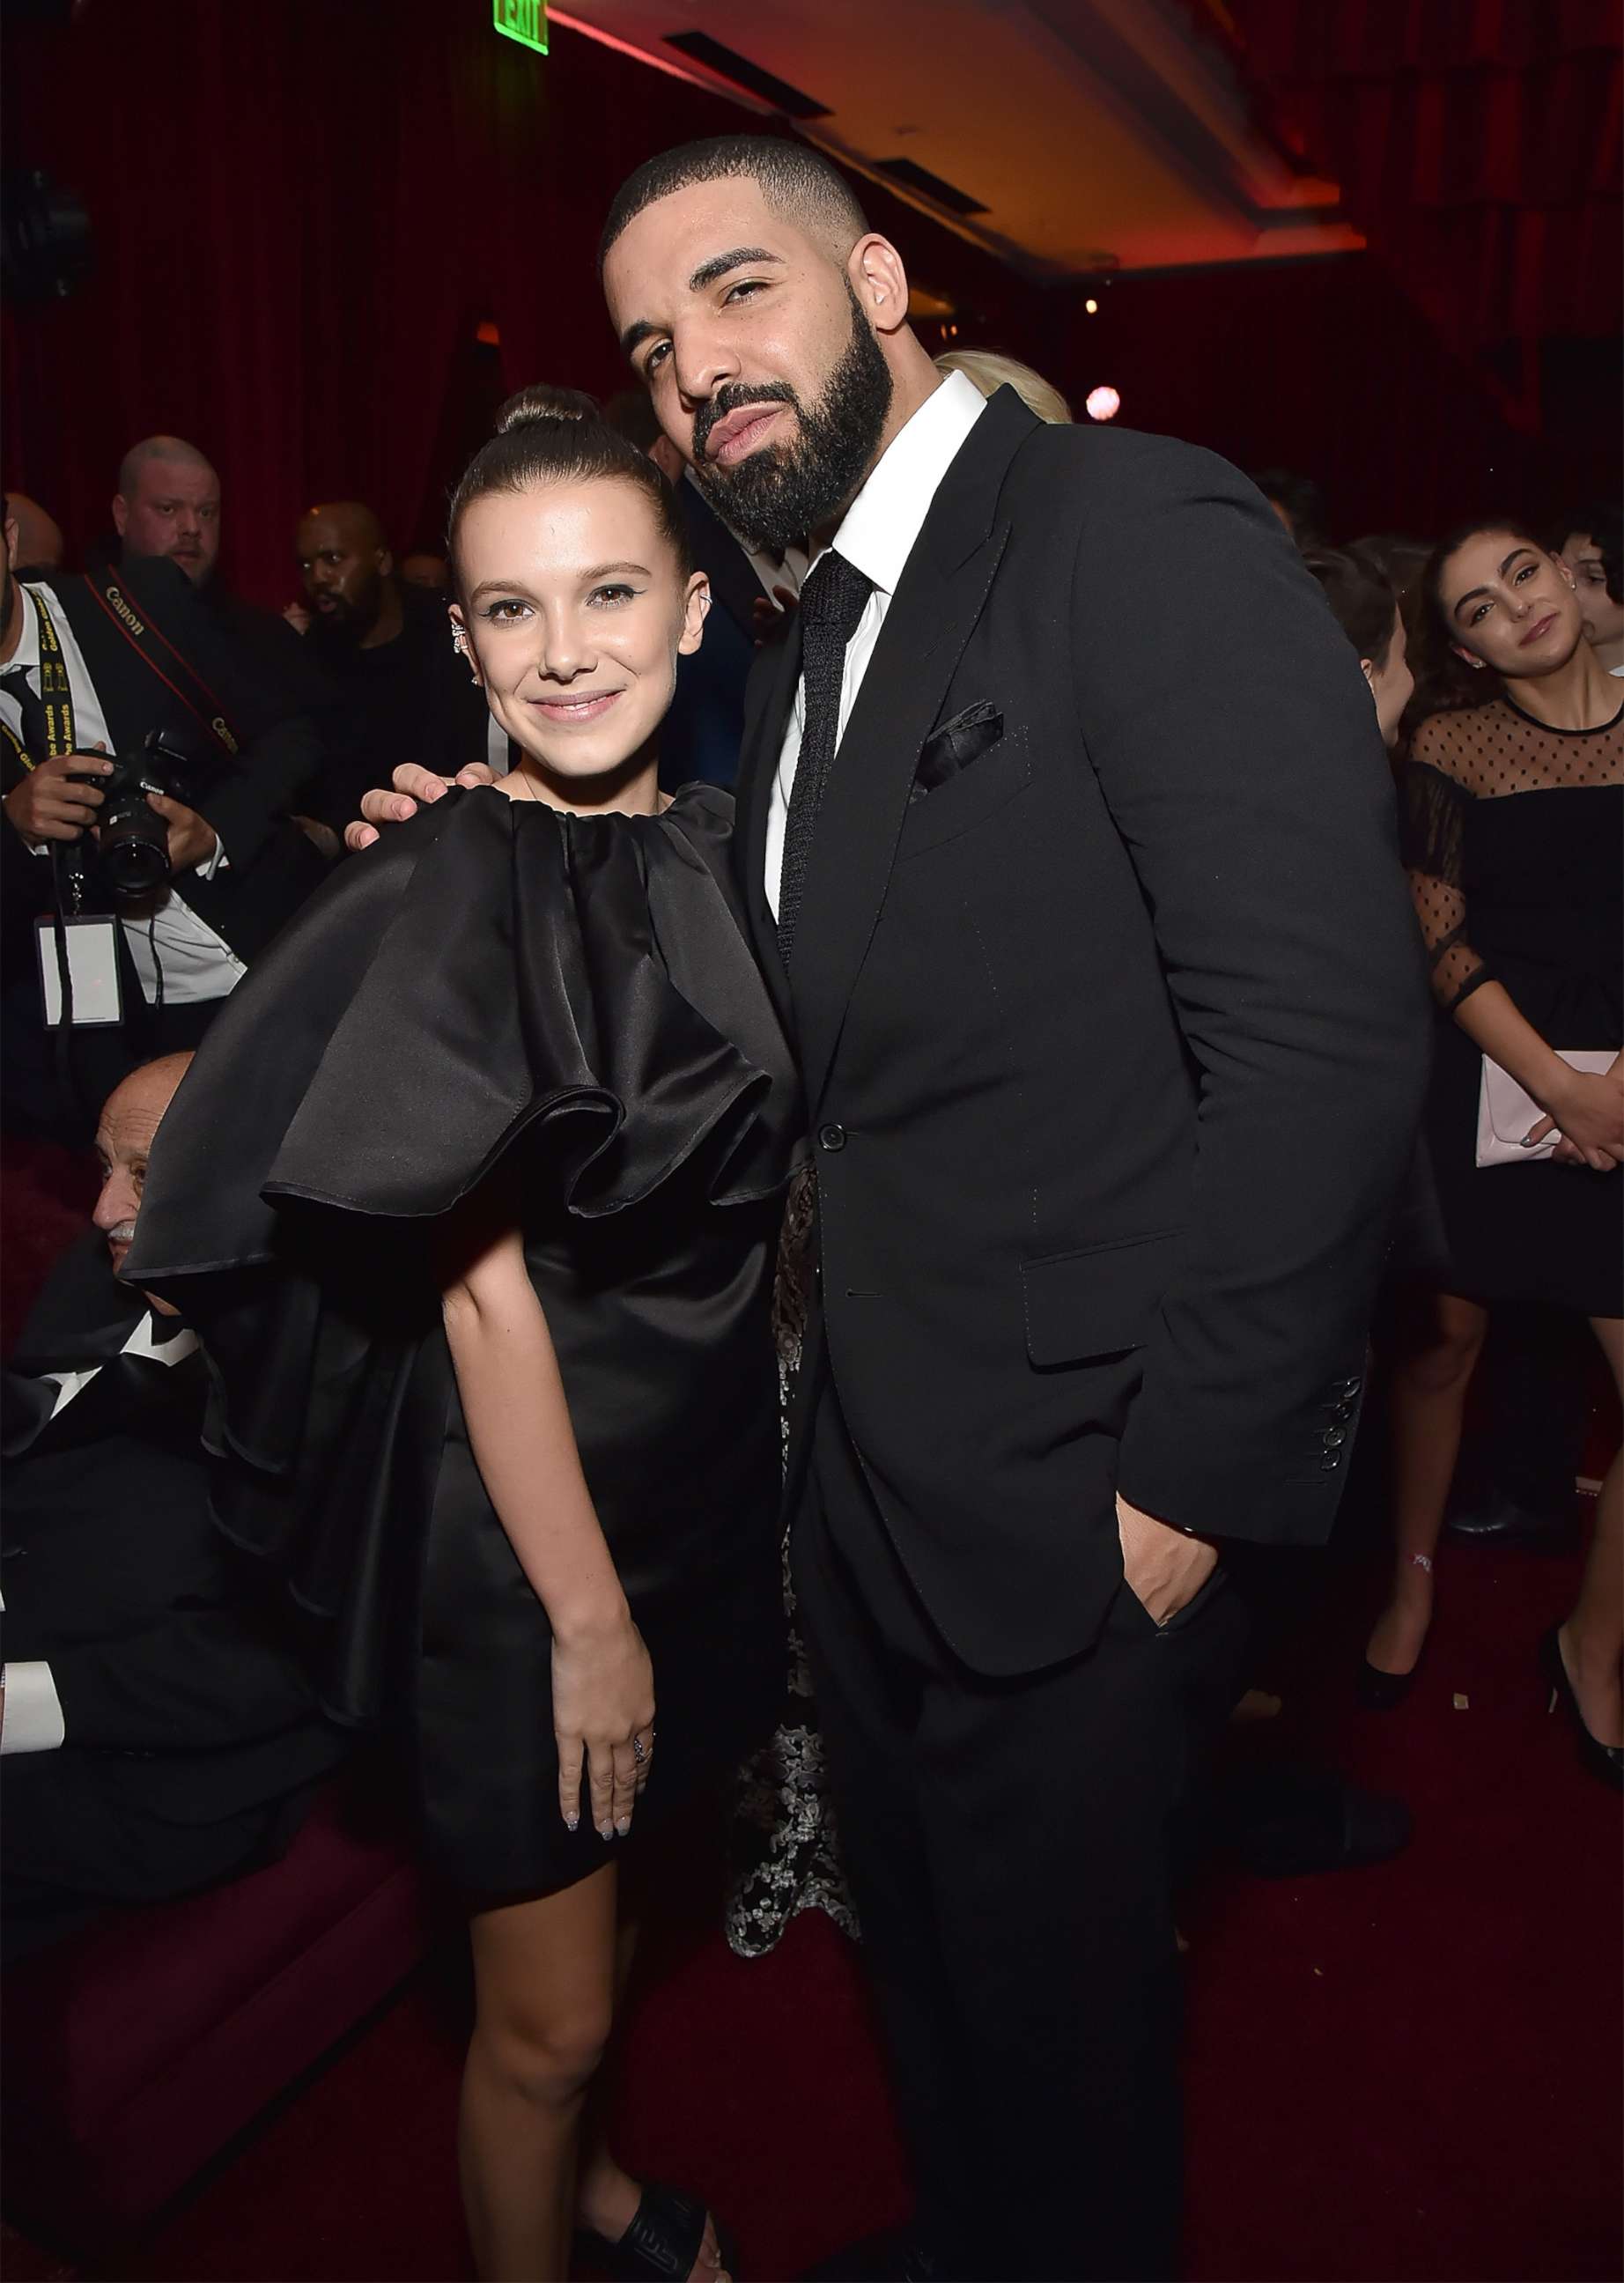 PHOTO: Millie Bobby Brown and Drake attend an event at the Waldorf Astoria Beverly Hills on Jan. 7, 2018 in Beverly Hills, Calif.